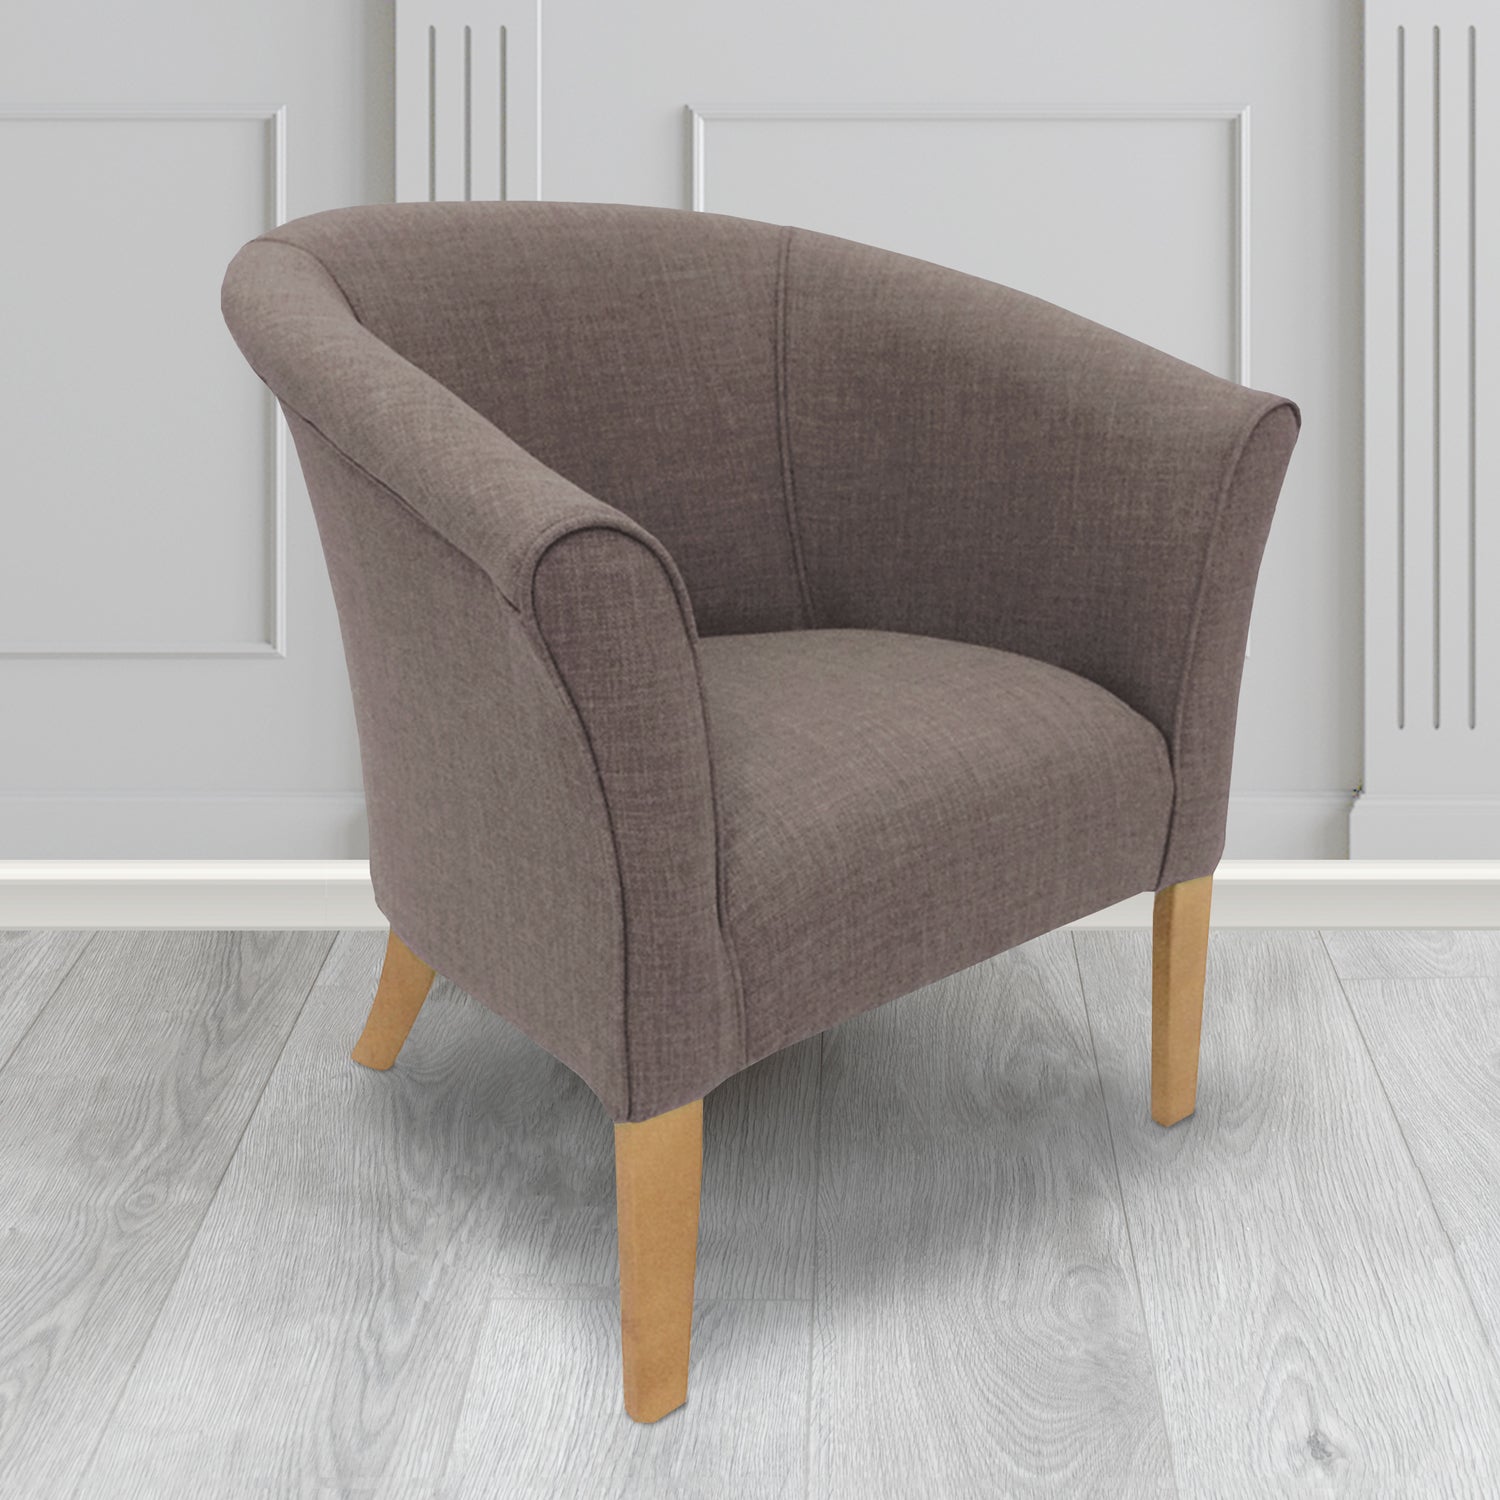 Quill Tub Chair in Linetta Steel Crib 5 Plain Fabric - Antimicrobial, Stain Resistant & Waterproof - The Tub Chair Shop